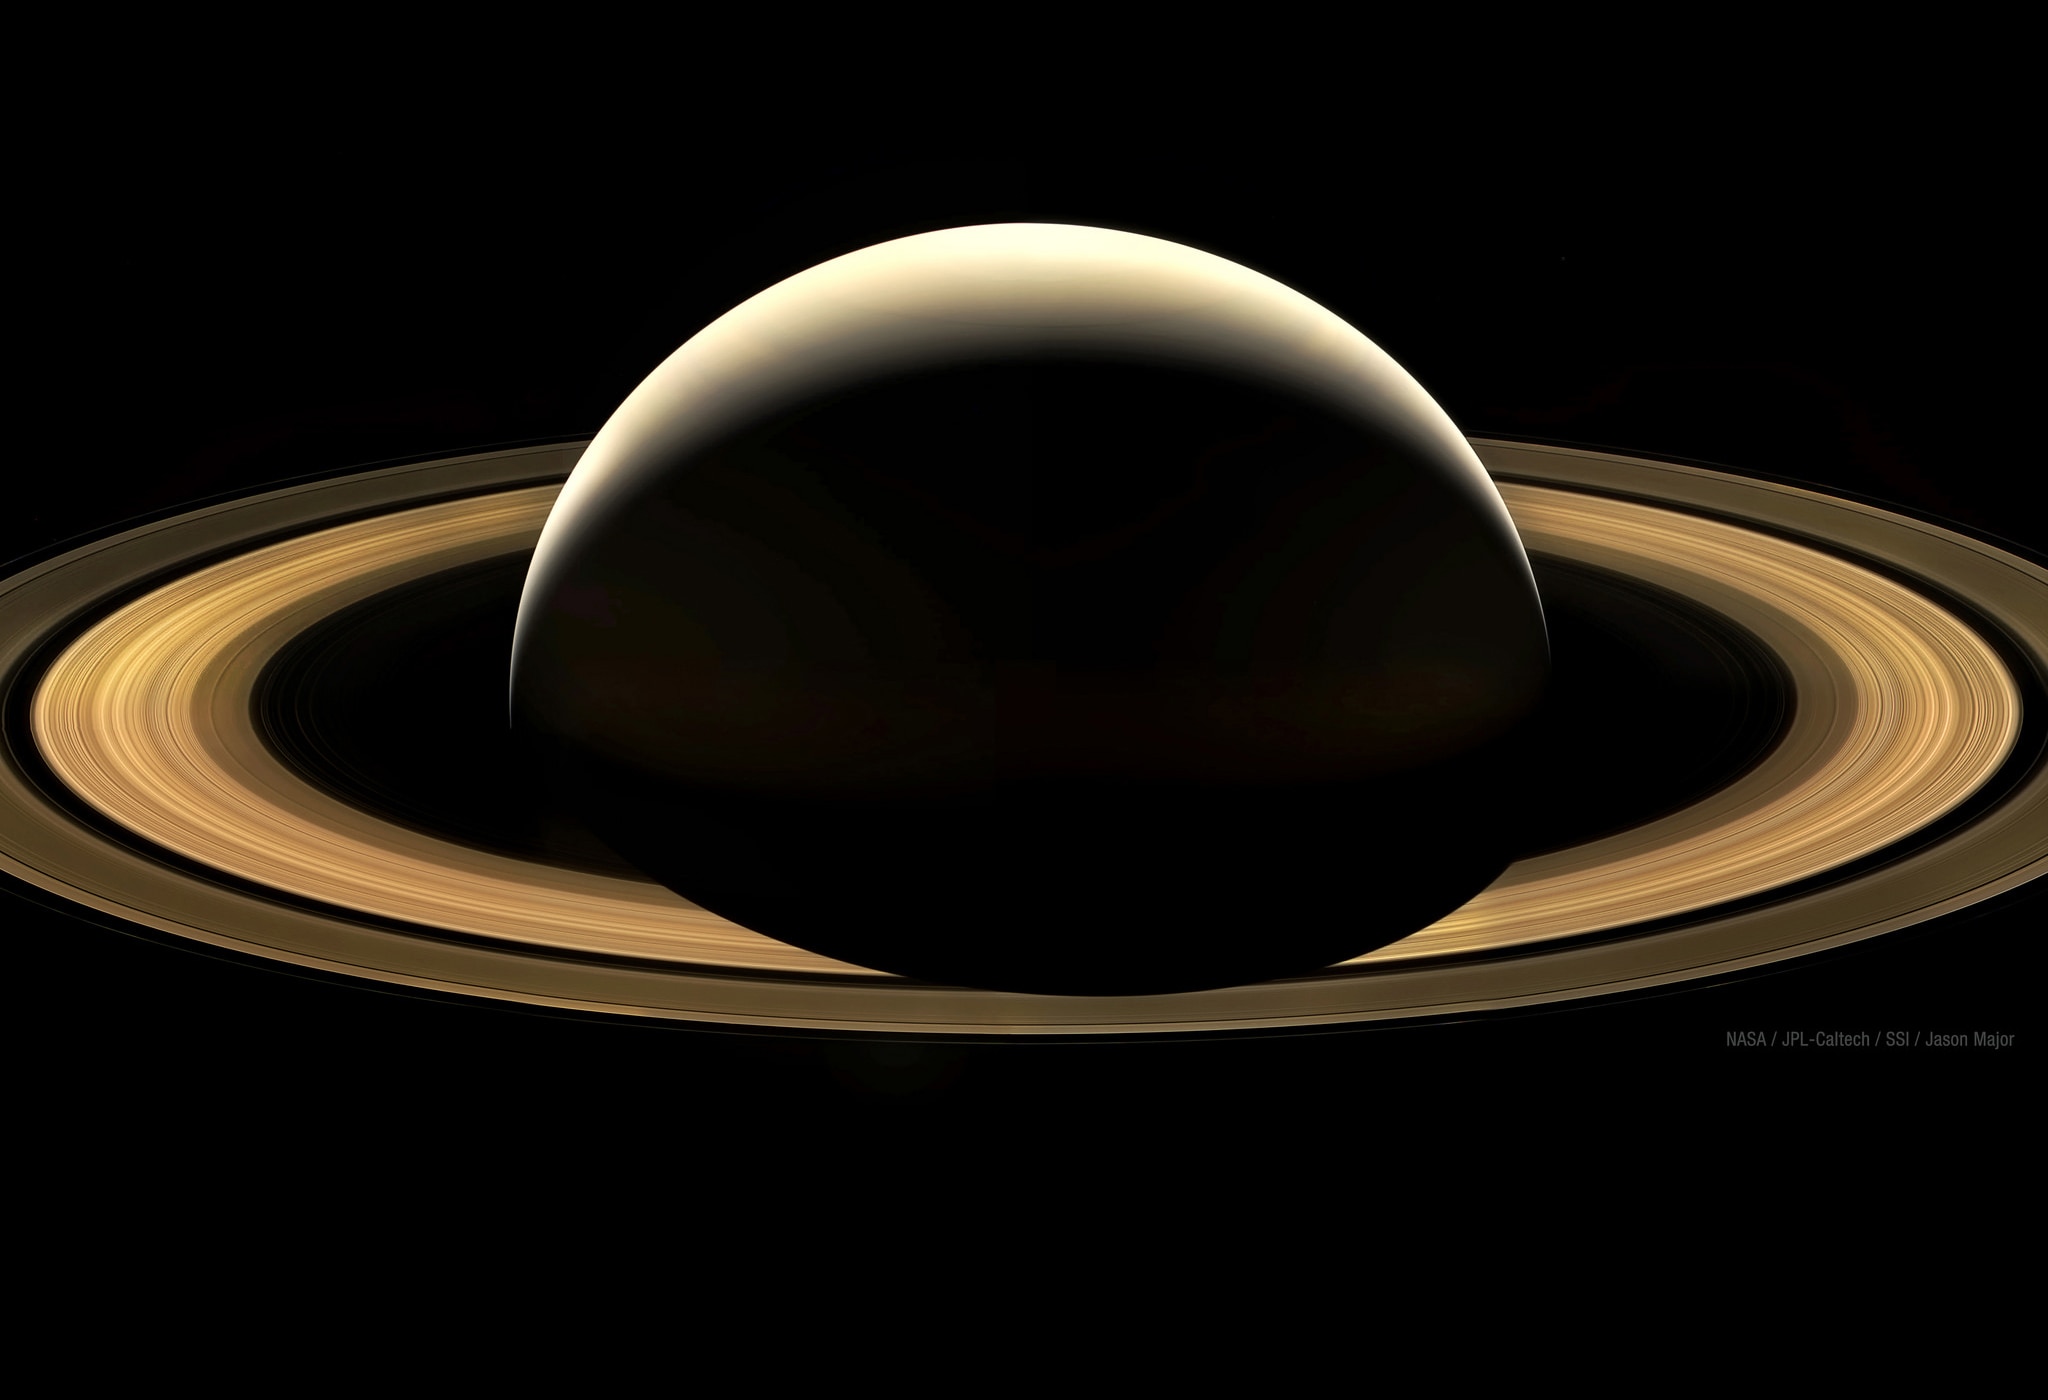 A mosaic from some of the last images Cassini ever took of Saturn. Credit: NASA/JPL-Caltech/Space Science Institute/Jason Major